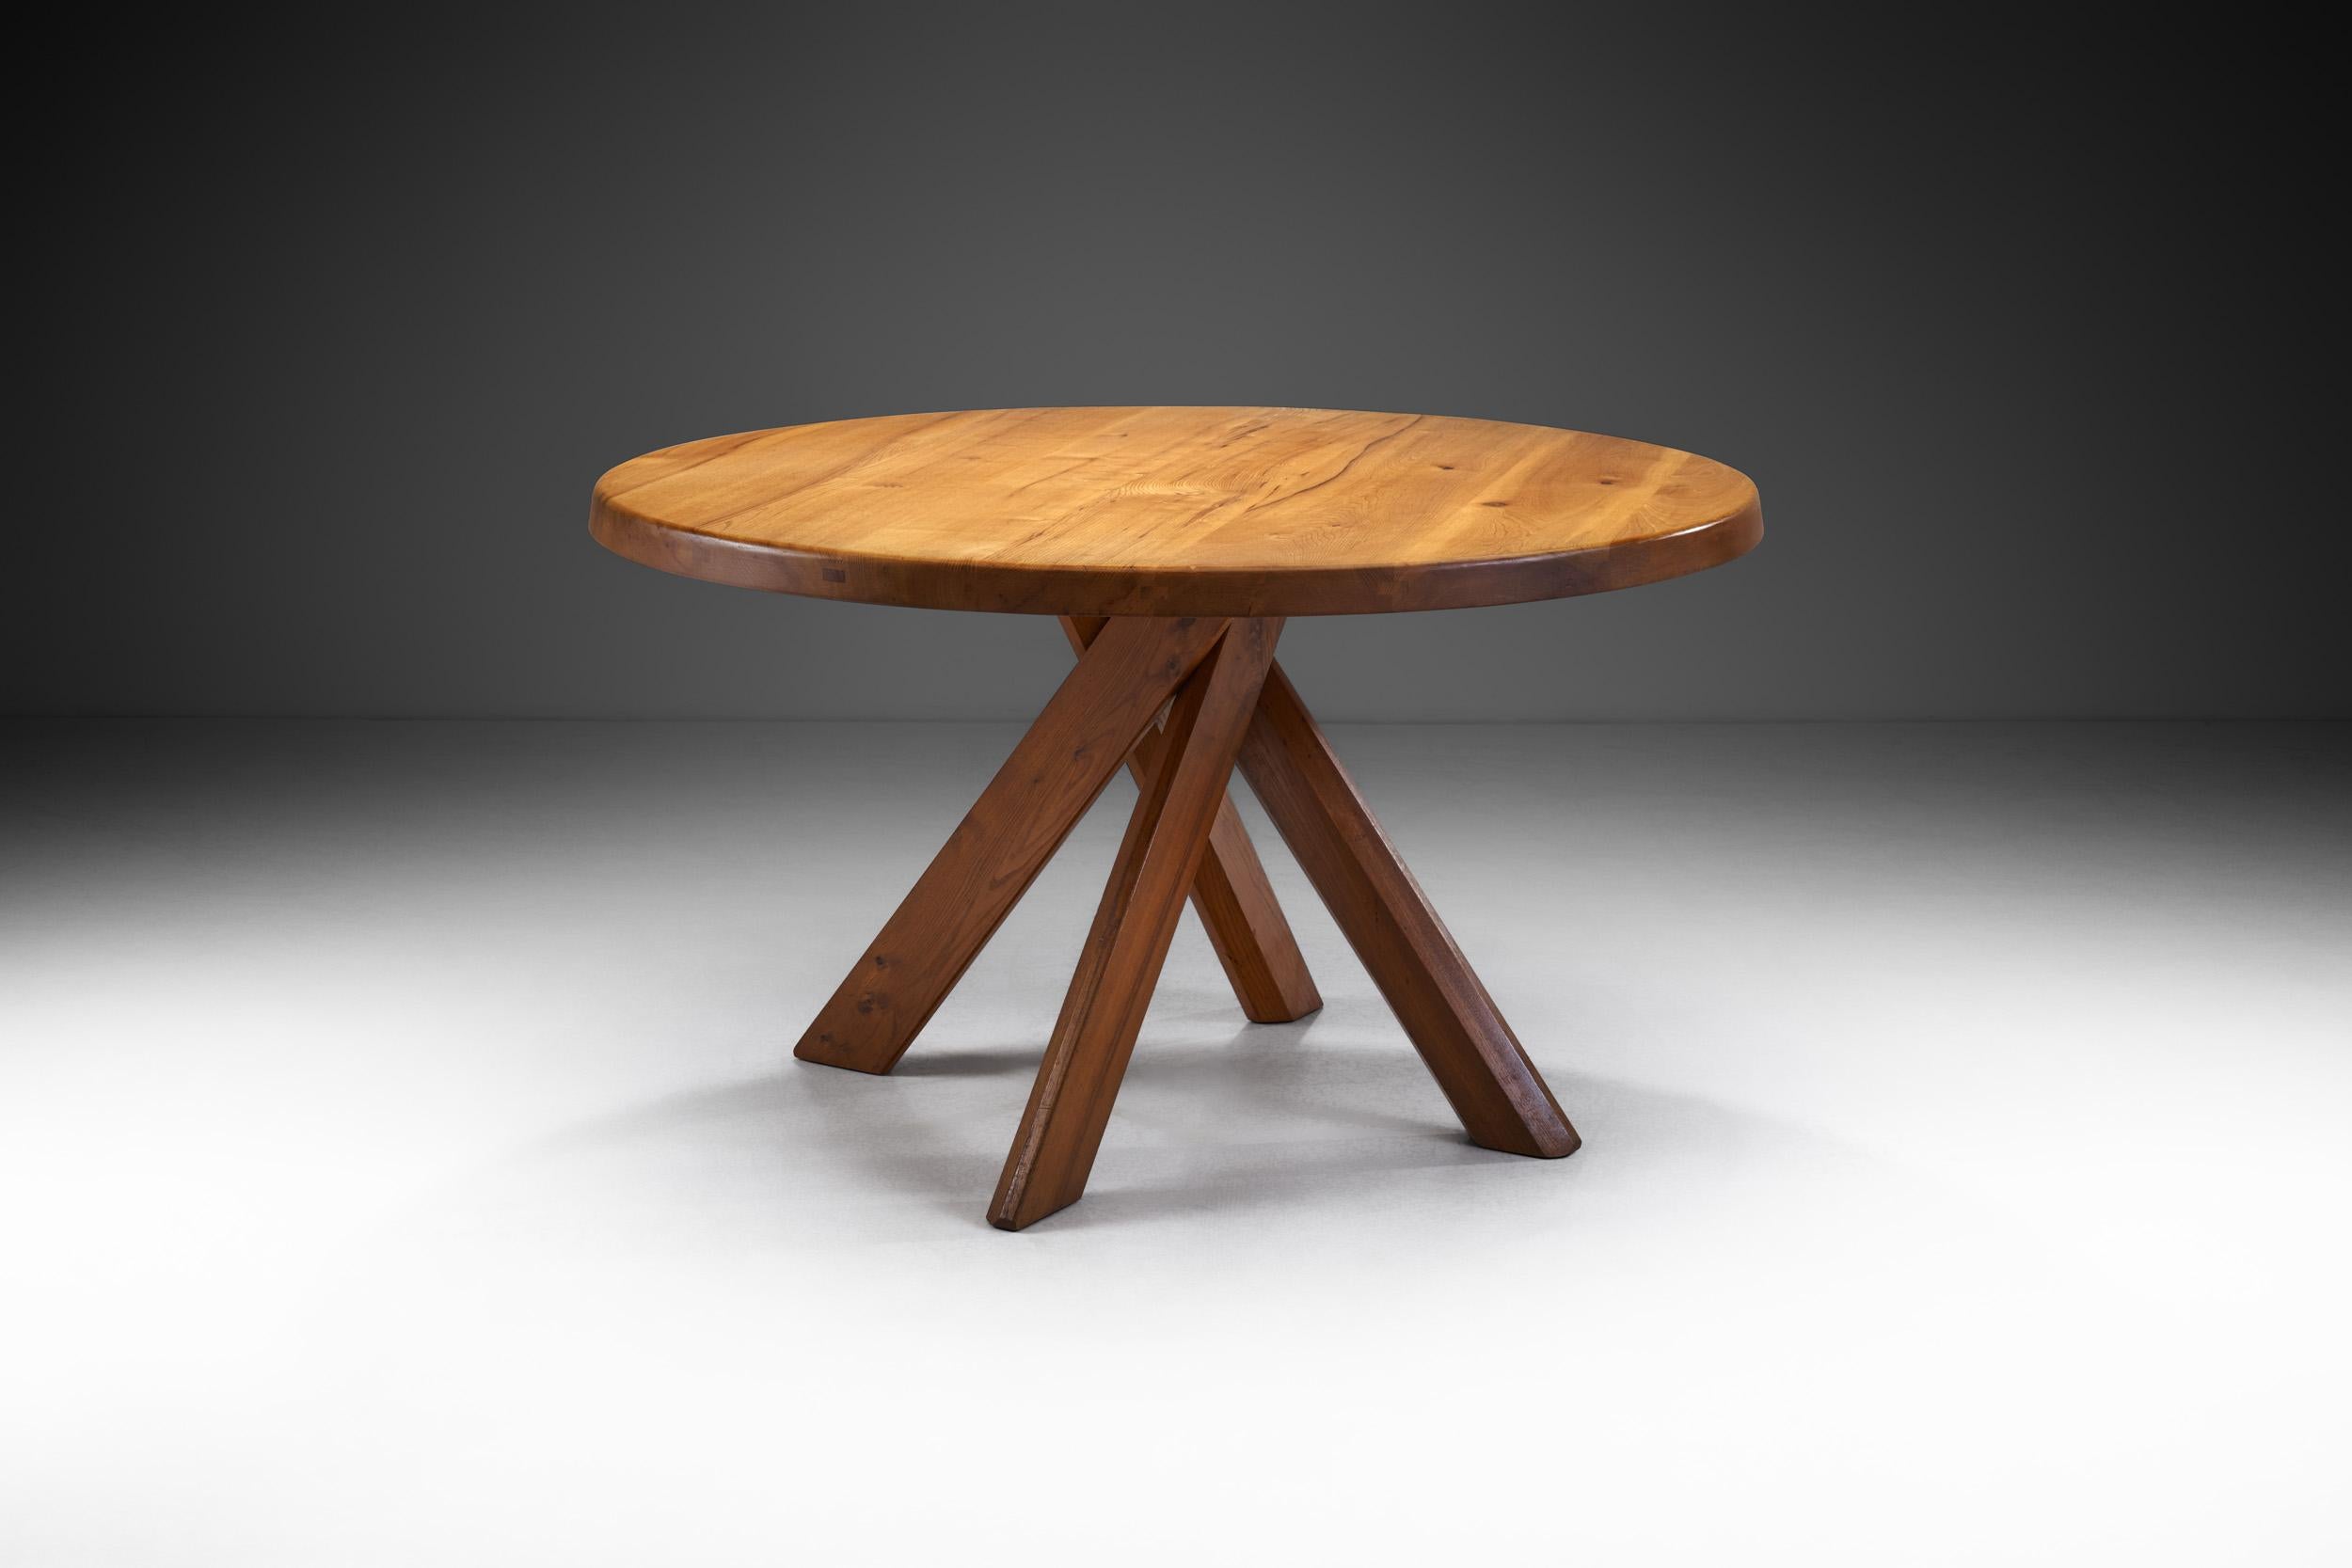 This “T21D” dining table, also known as “Sfax” is among the very best of Chapo’s designs with a strong architectural approach. Although very sturdy on first sight, the outstanding design and execution of the legs makes this table the embodiment of